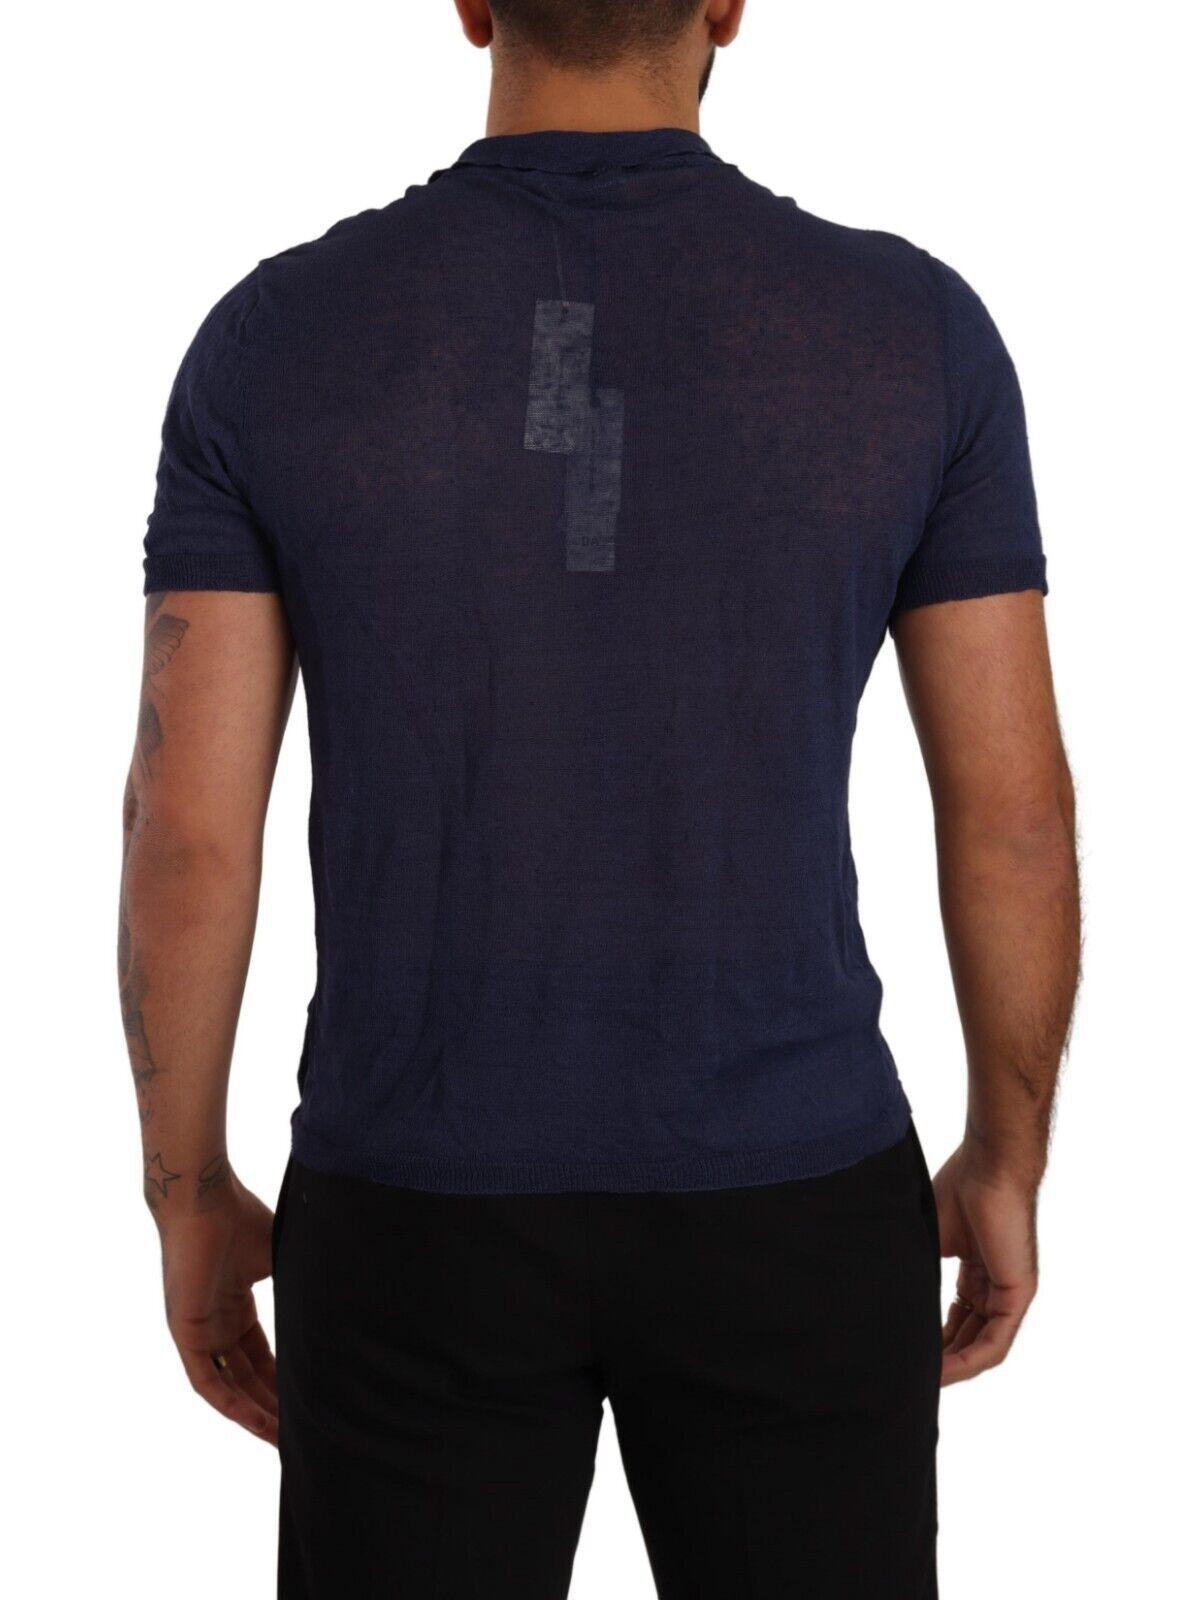 Daniele Alessandrini Men's Navy Blue Linen Collared T-shirt - Designed by Daniele Alessandrini Available to Buy at a Discounted Price on Moon Behind The Hill Online Designer Discount Store